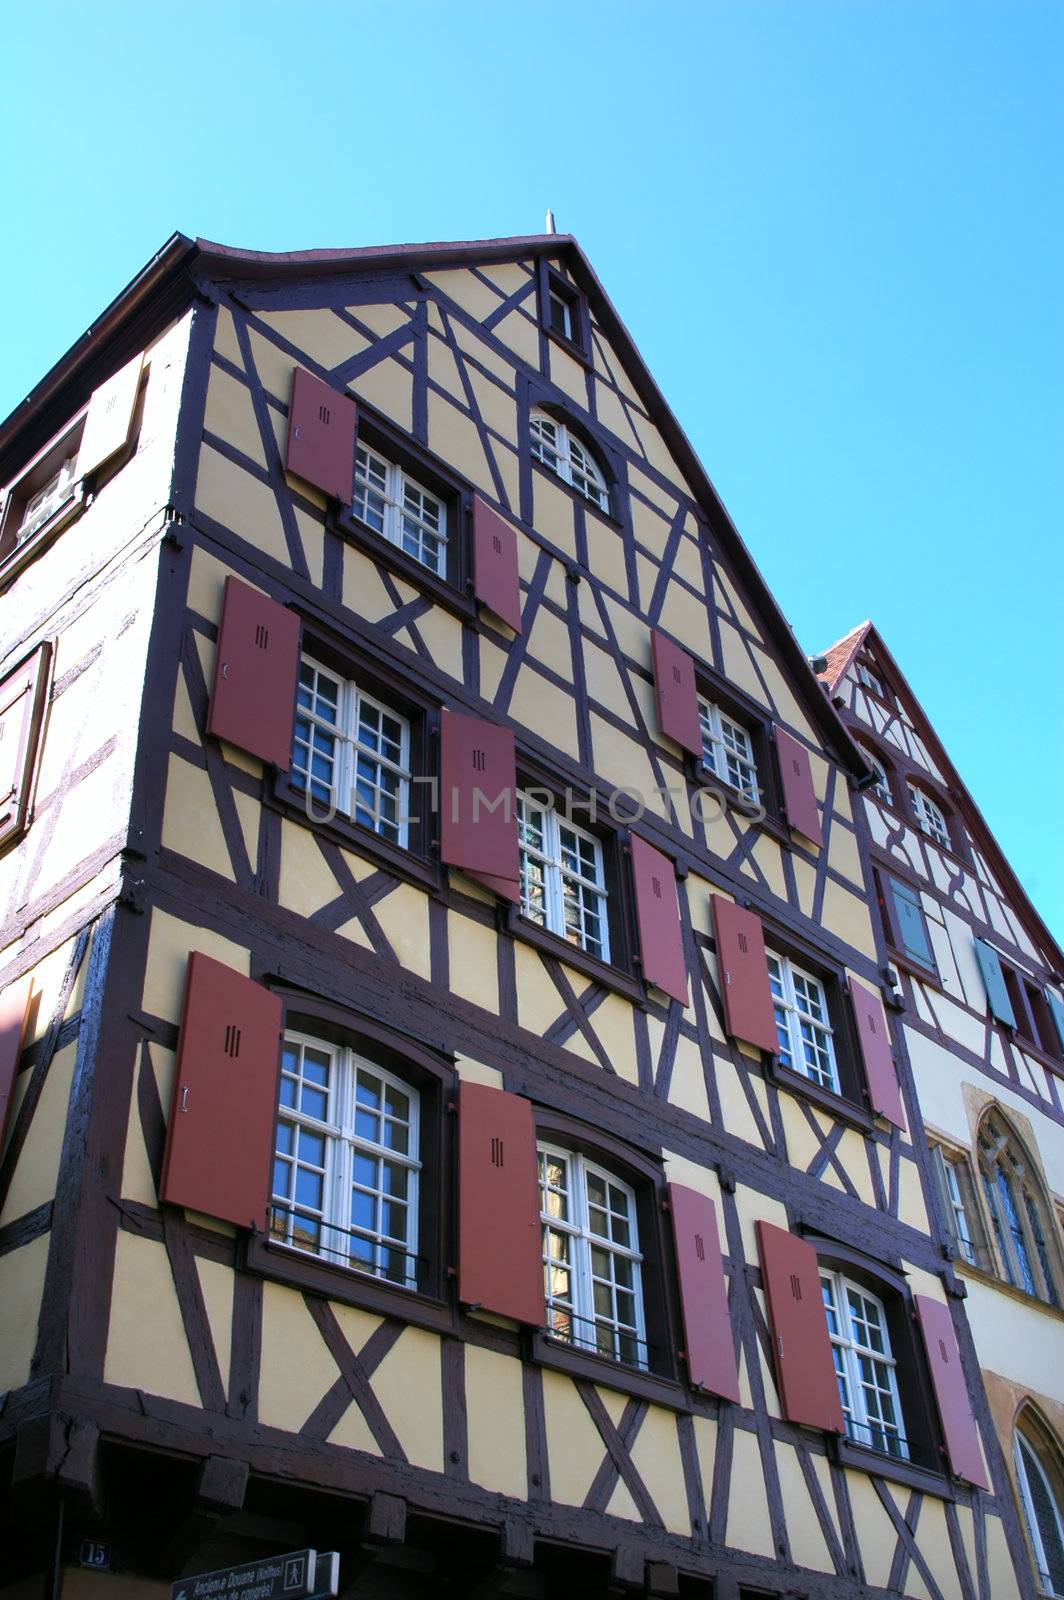 Alsace typical traditional House (Colmar, France)